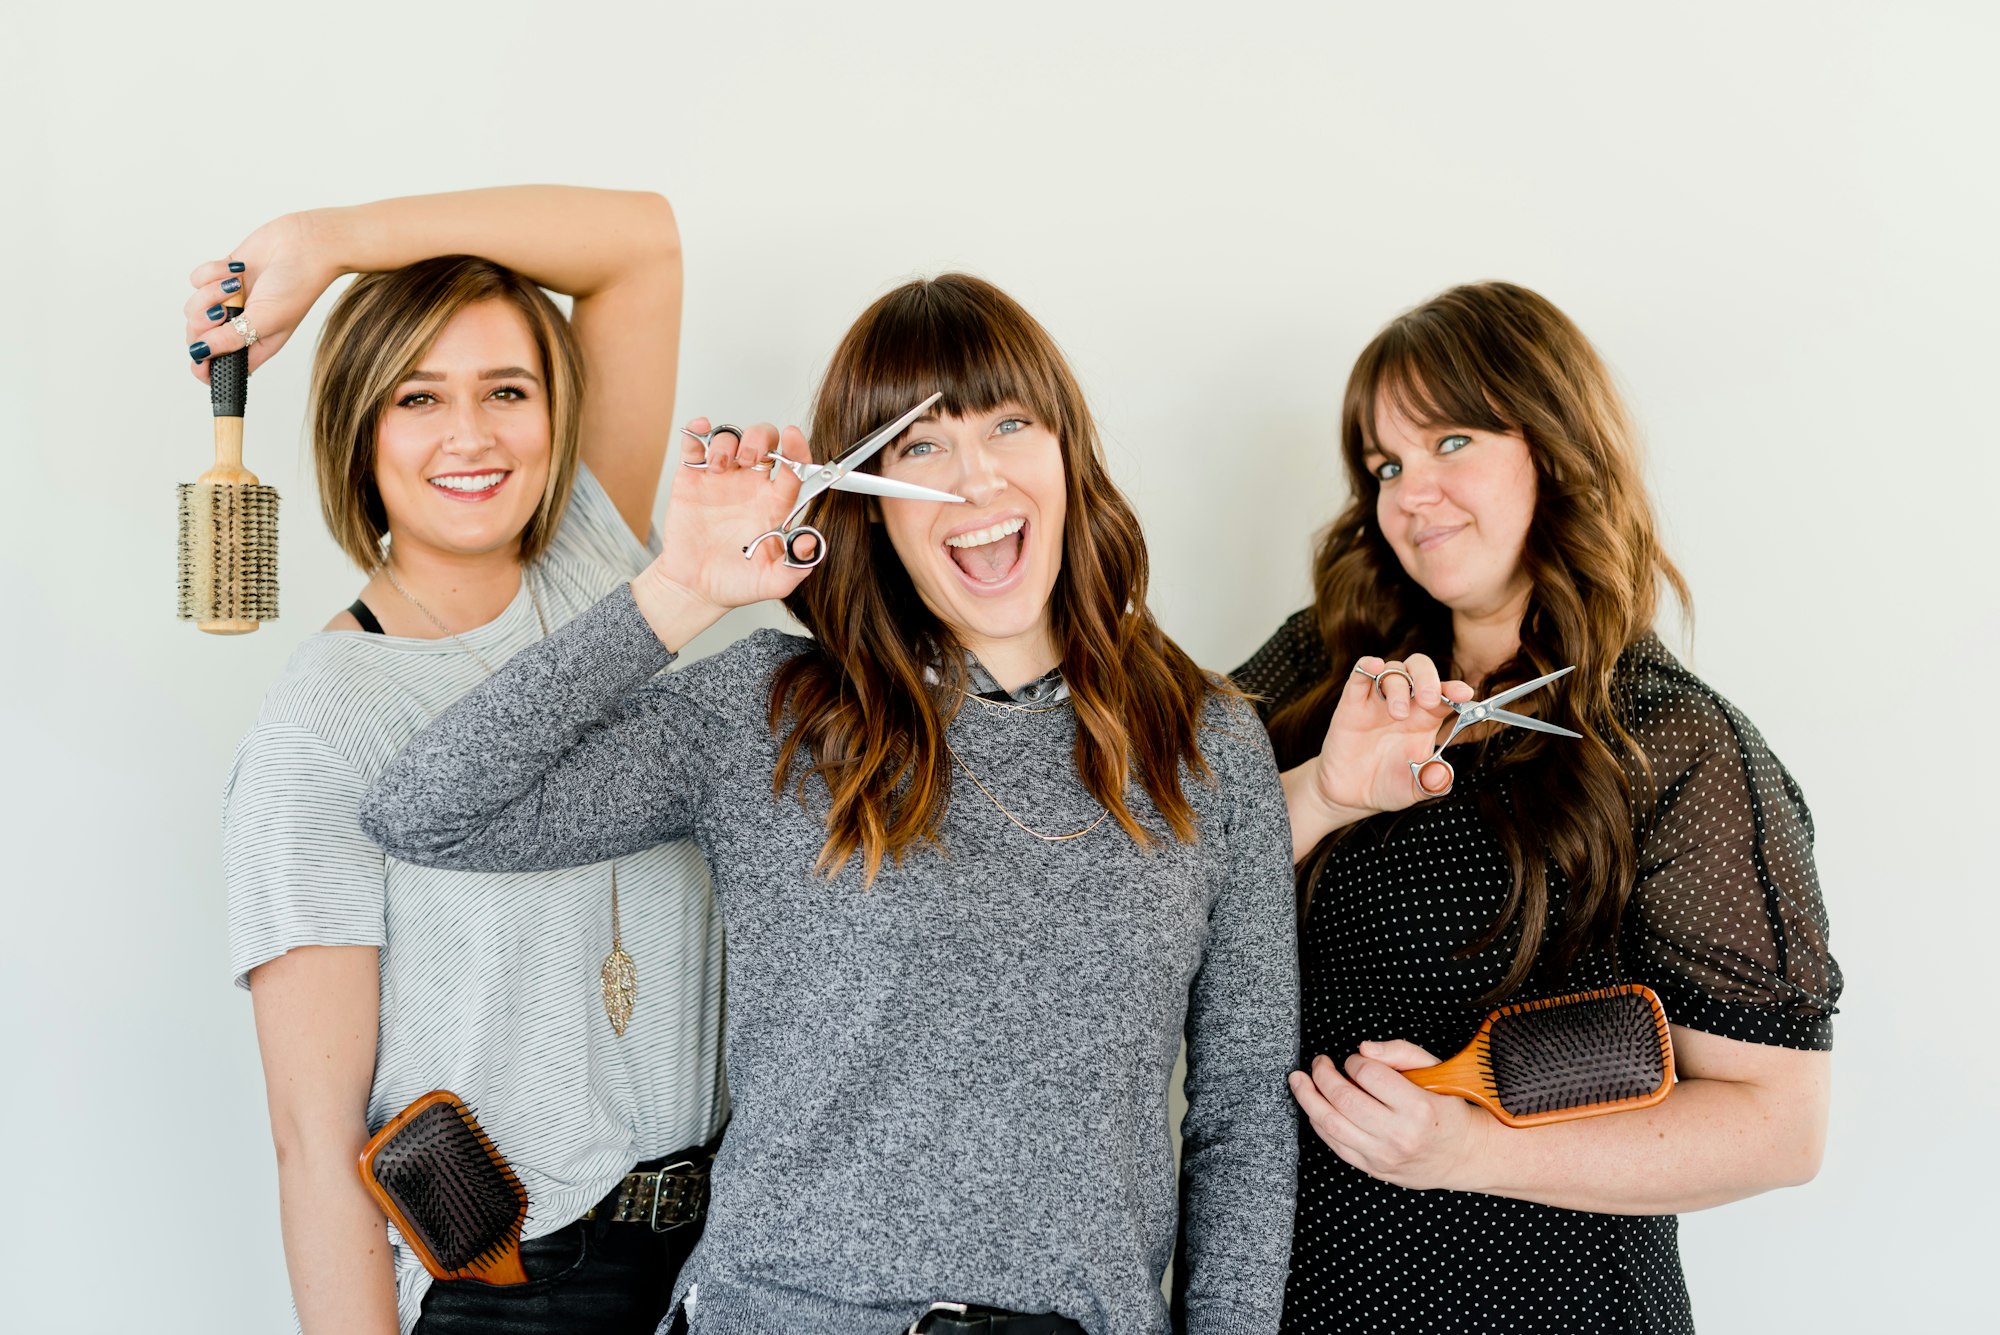 Hair Stylists having fun 

Kulor Salon is the best place for hair styling, located at 22 East Center Street in Logan, Utah. 
https://www.instagram.com/kulorsalon/
https://www.kulorsalon.com/
435-213-9075

https://www.instagram.com/AwCreativeUT/
https://www.awedcreative.com/
#AwCreativeUT #awcreative #AdamWinger 